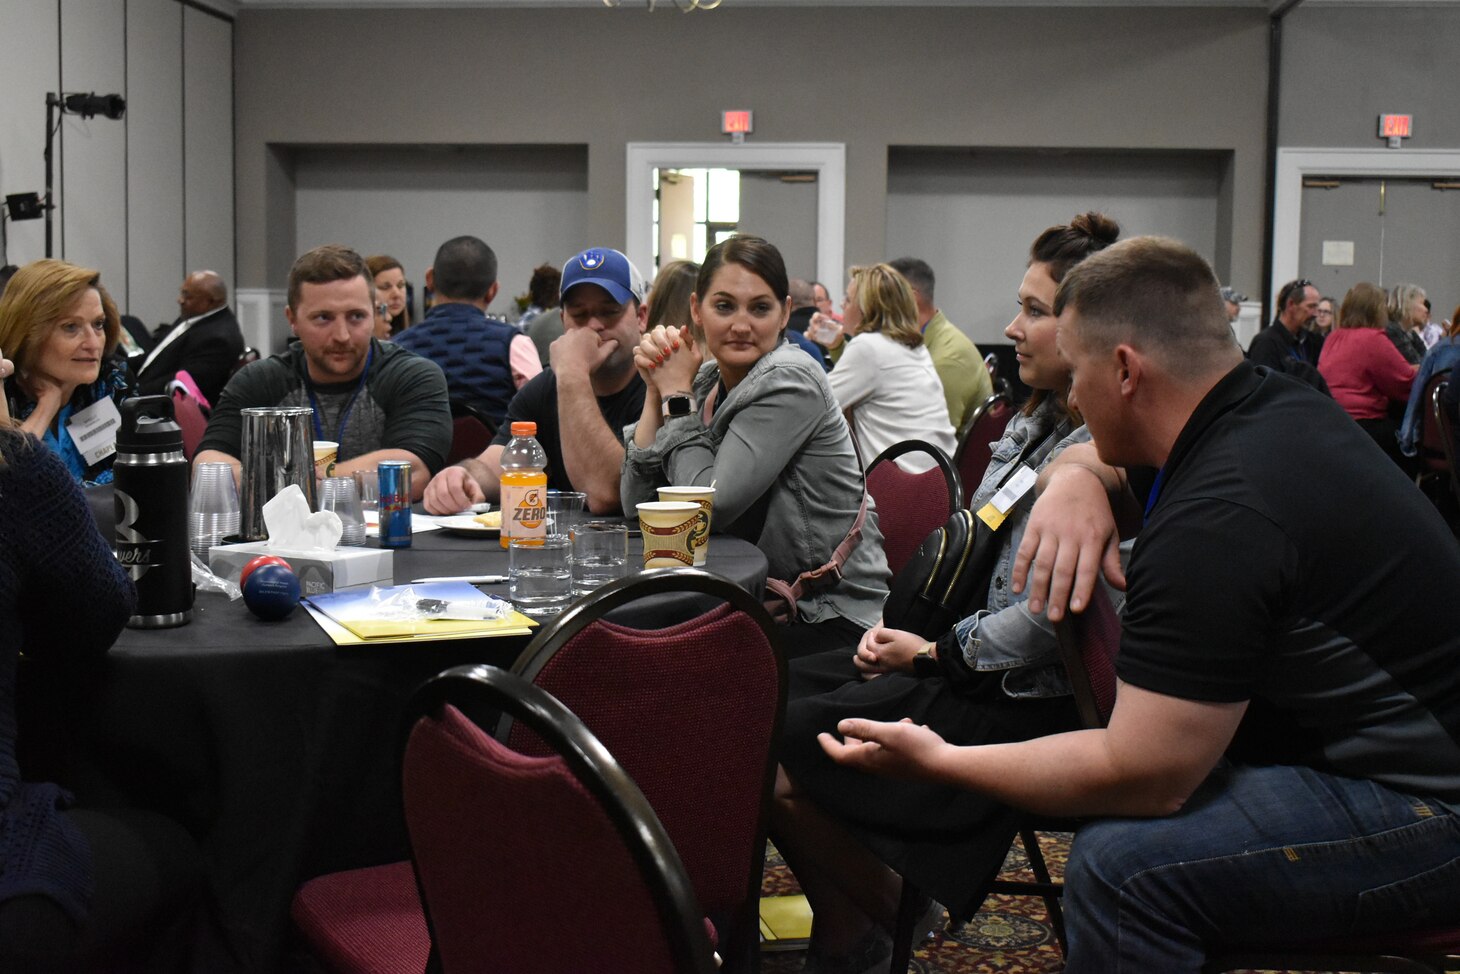 A group of Sailors and their families discuss operational stress control during a tabletop exercise conducted at the Returning Warrior Workshop (RWW).